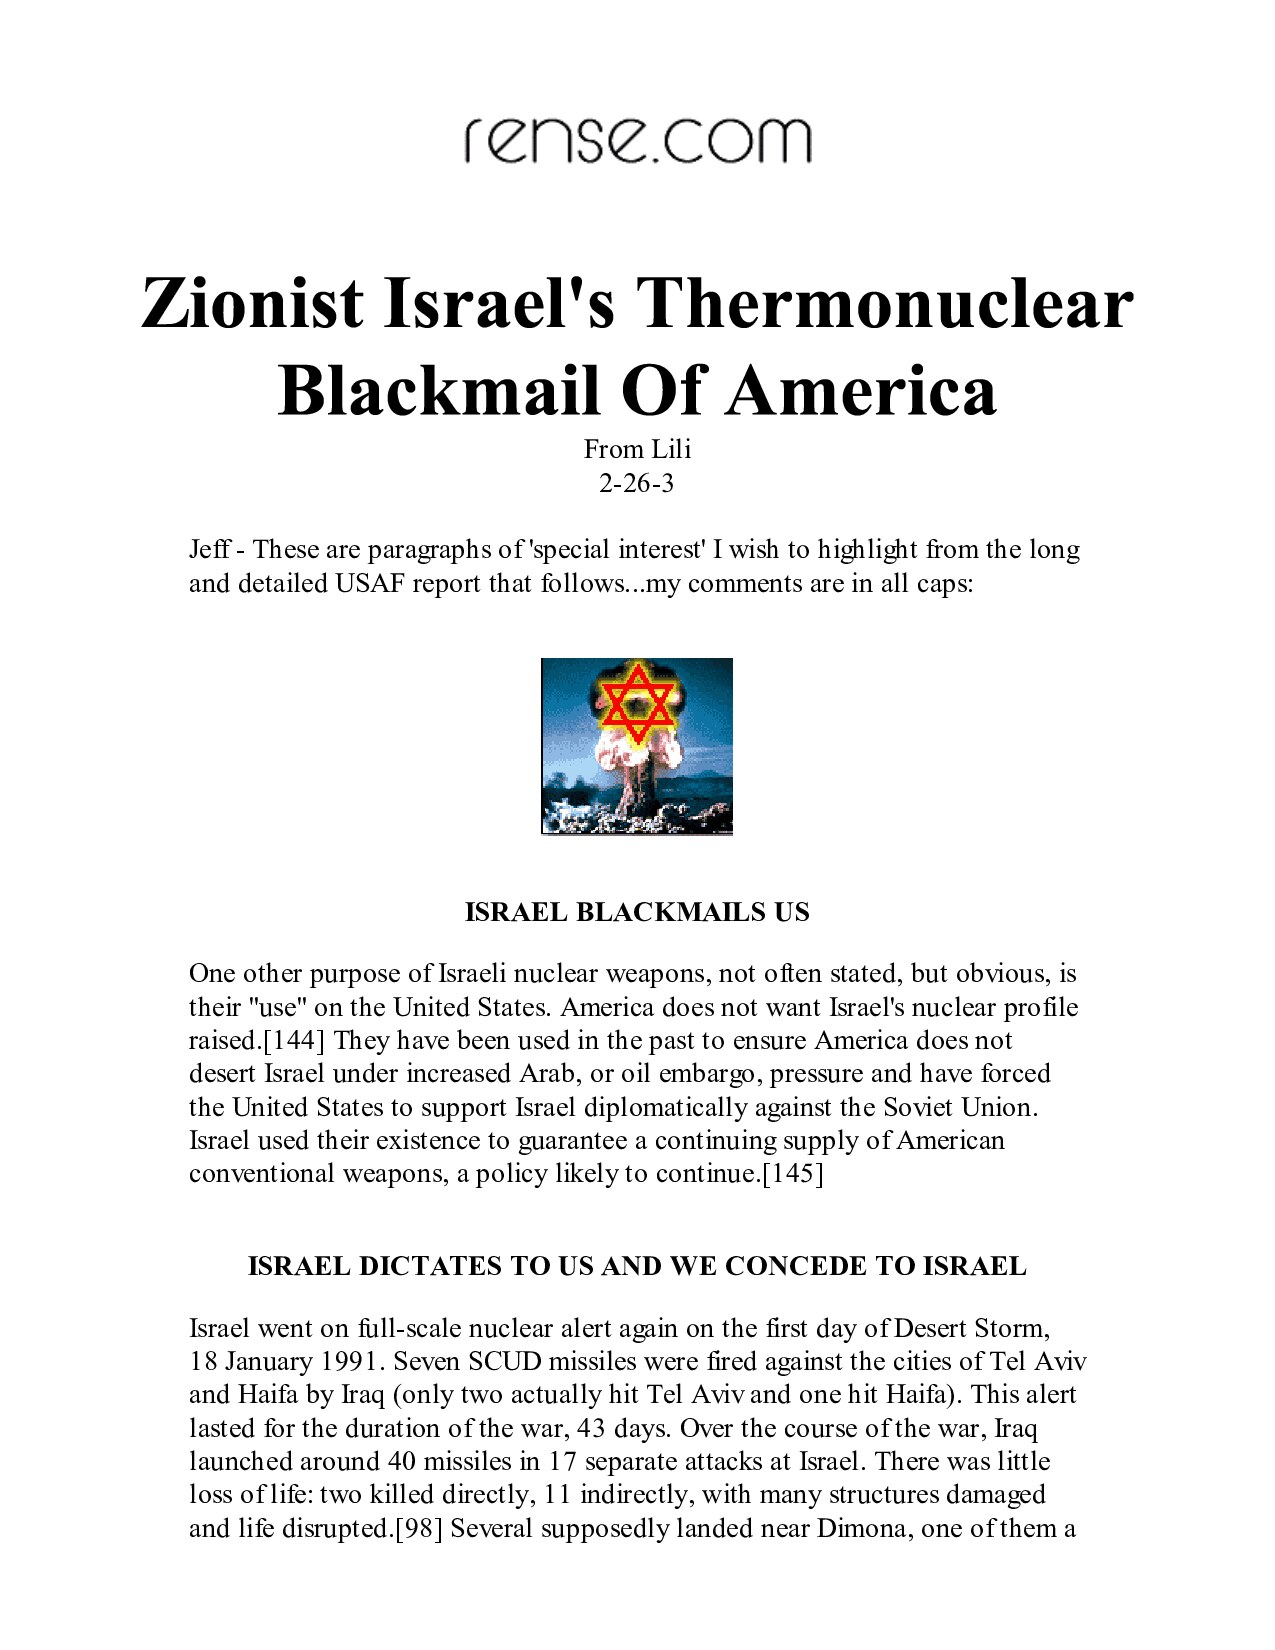 Zionist Israel's Thermonuclear Blackmail Of America